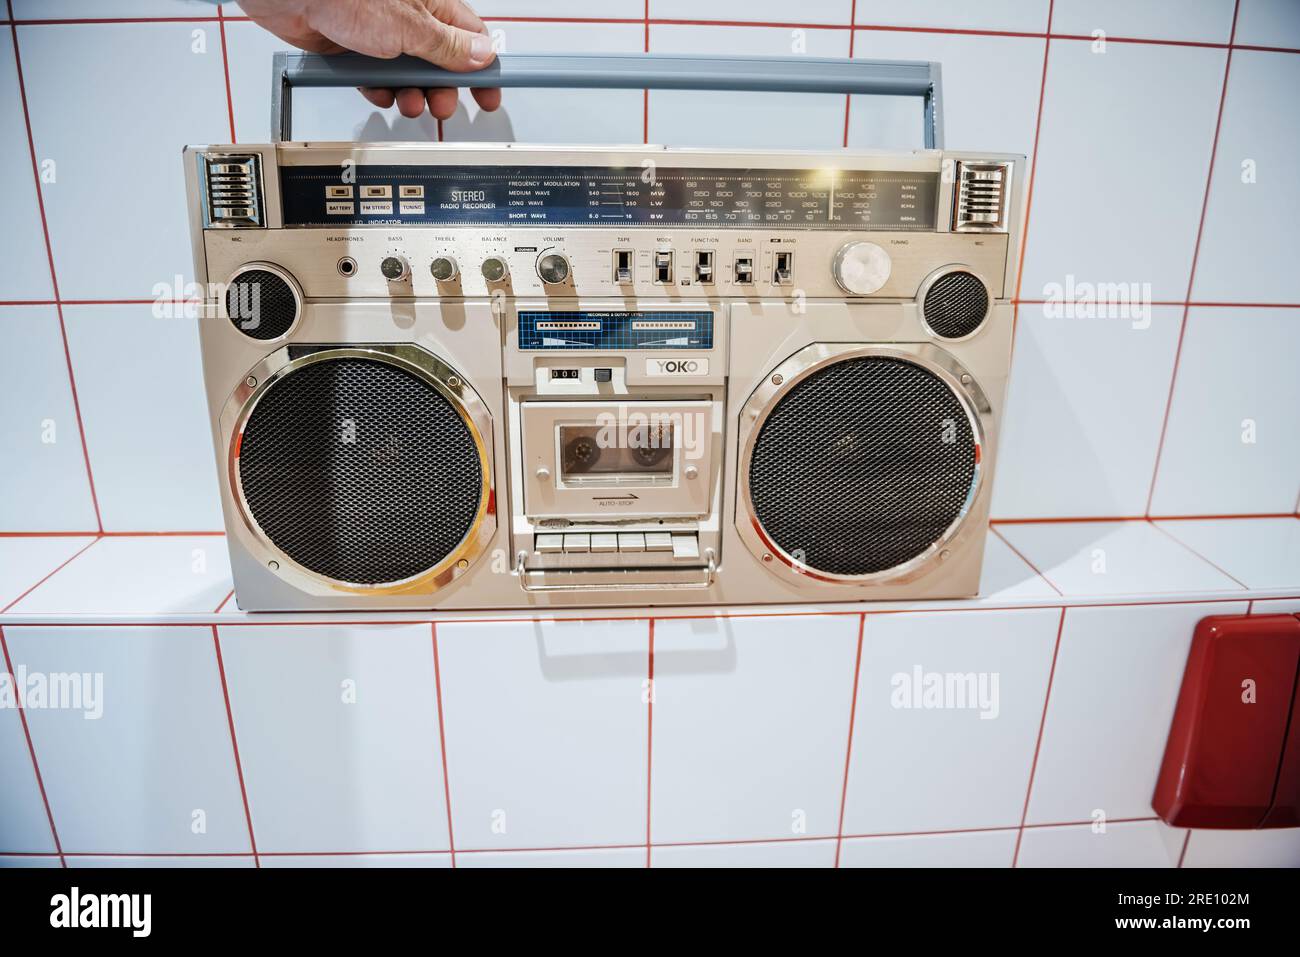 Schiltach, Germany - Jul 14, 2022: Silver 80s urban retro radio, portable boombox with cassette tape player and bright buttons - man hand on top. Vintage digital technology for nostalgic projects Stock Photo